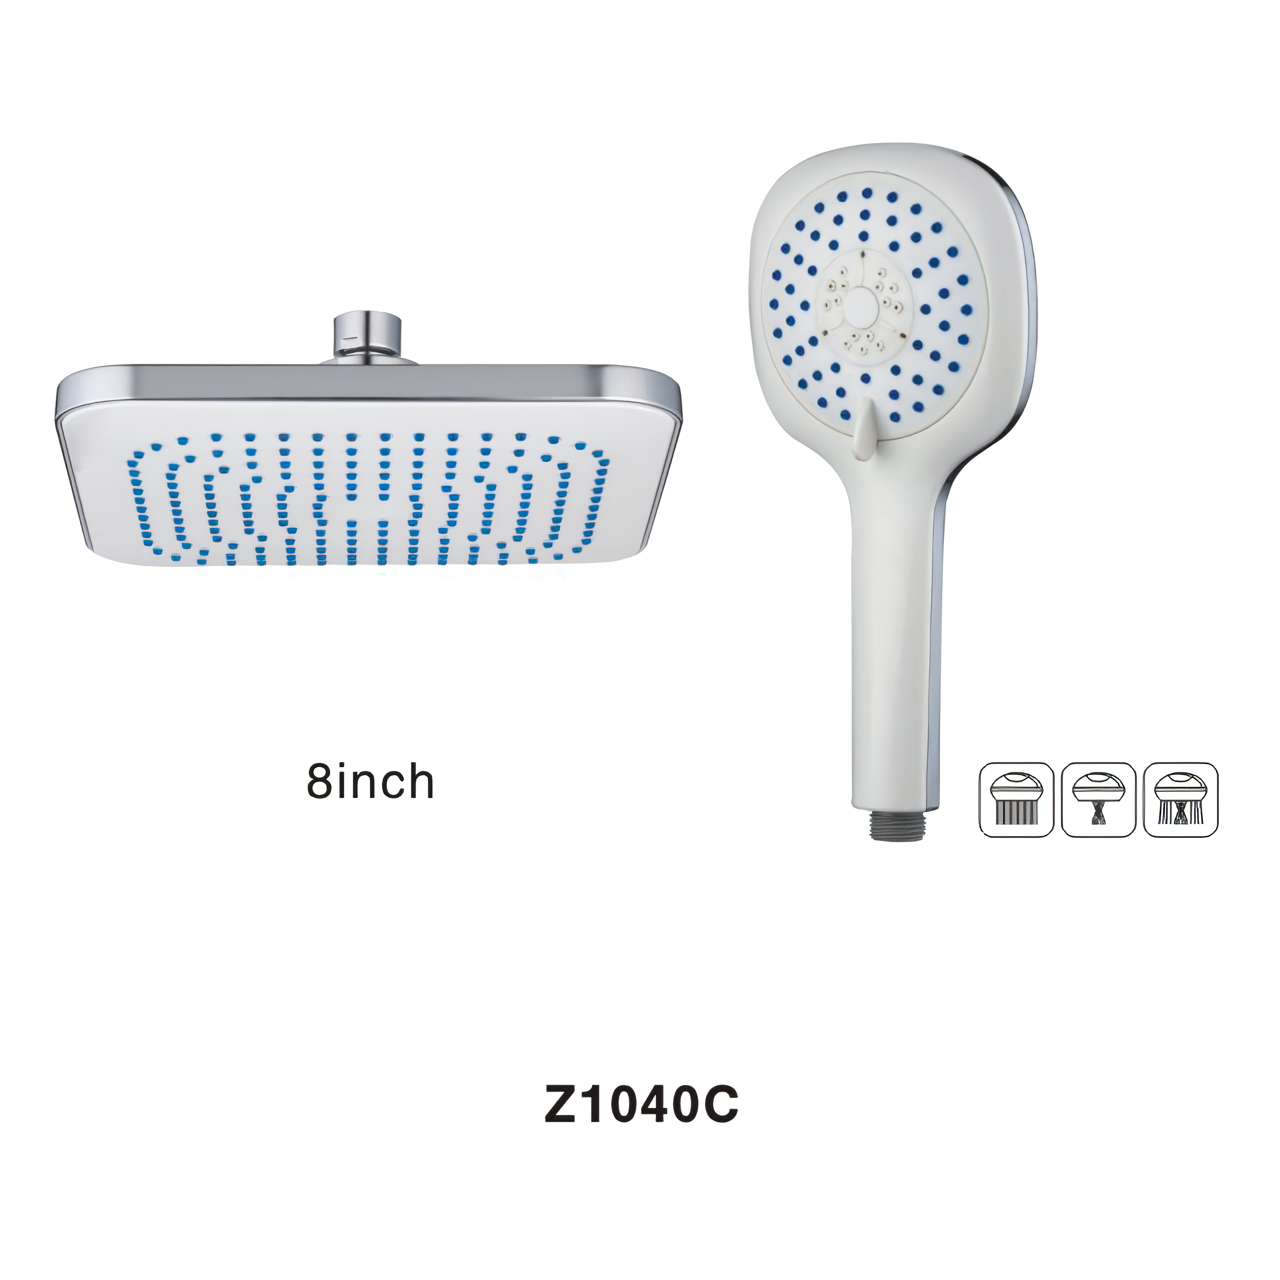 What are the key factors influencing consumer preferences in the selection of a Bathroom Shower Head?